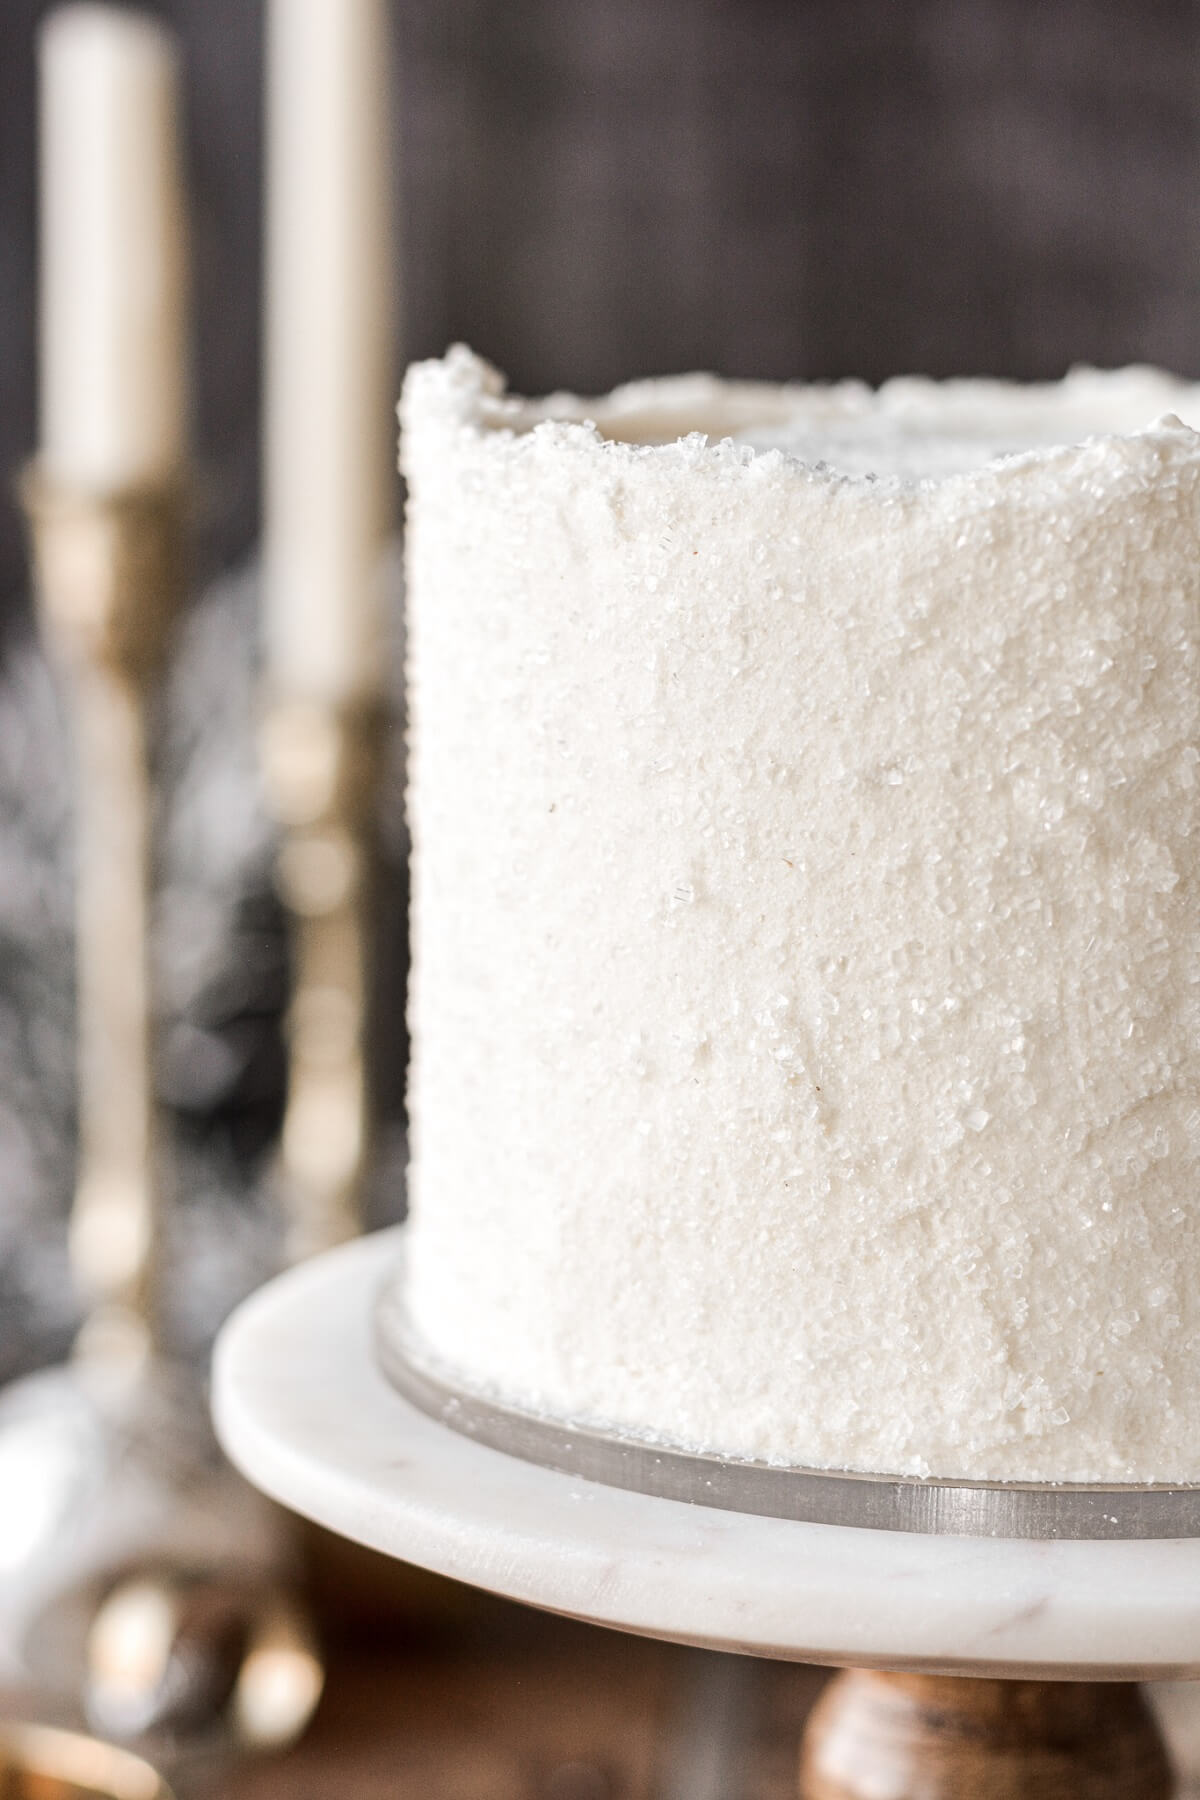 White Christmas cake covered in sparkling sugar.